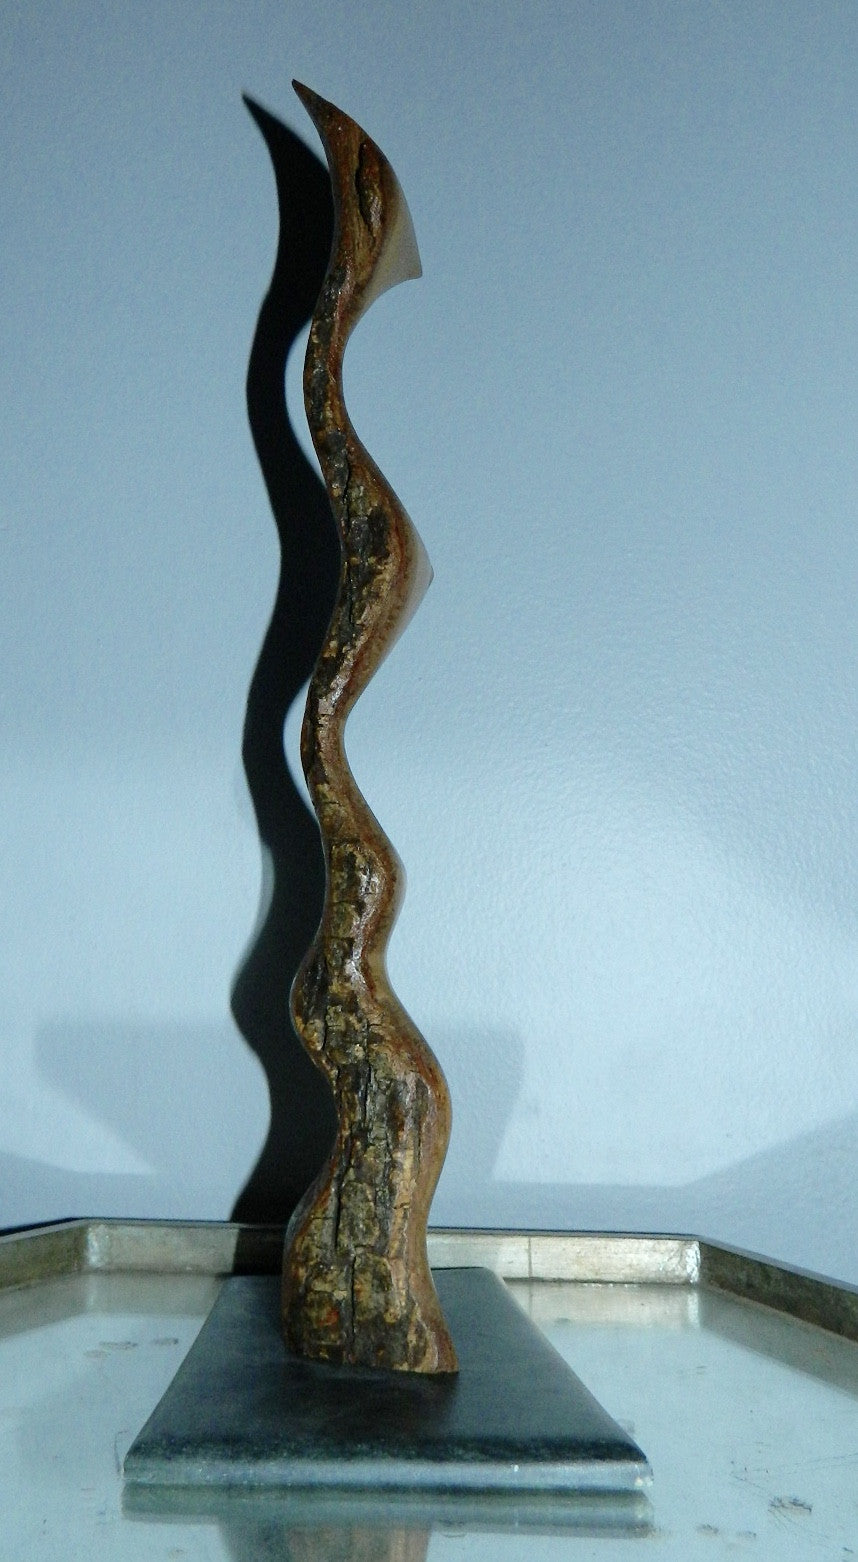 abstract moderne Alain Flamand maple wood sculpture stone base vintage wood carving Quebec artist